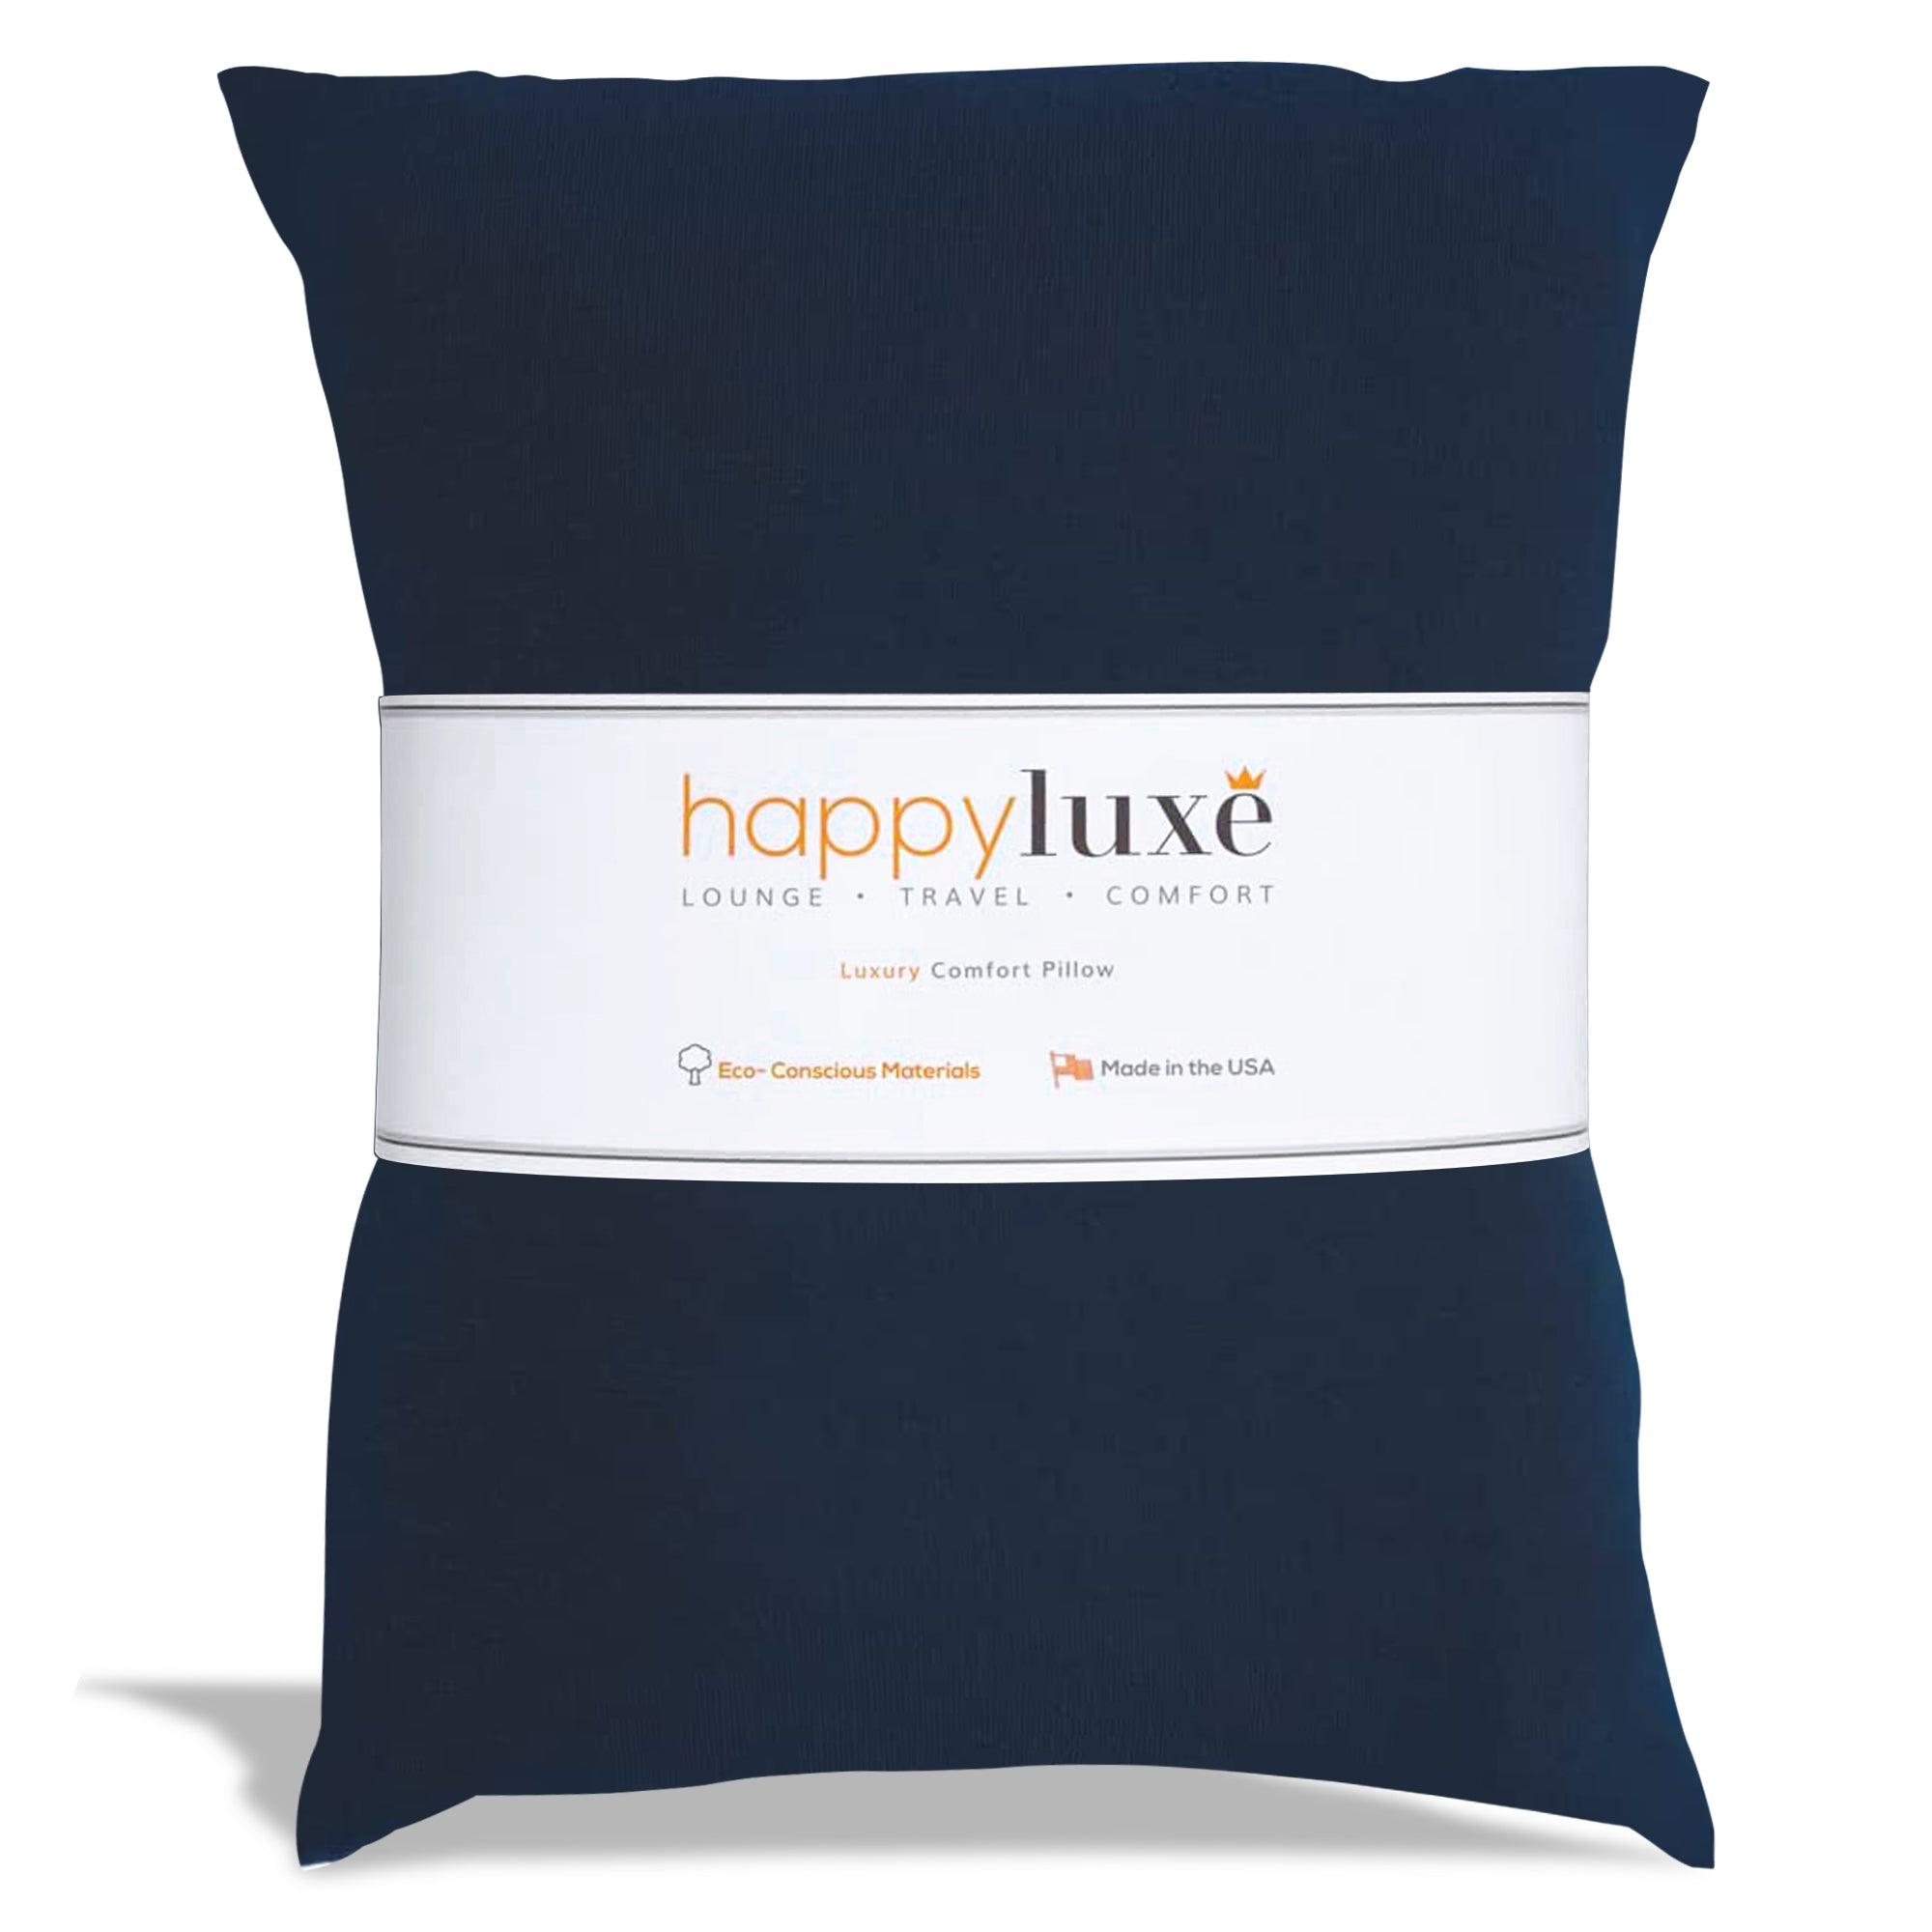 Odyssey Travel Pillow in Navy Blue - HappyLuxe